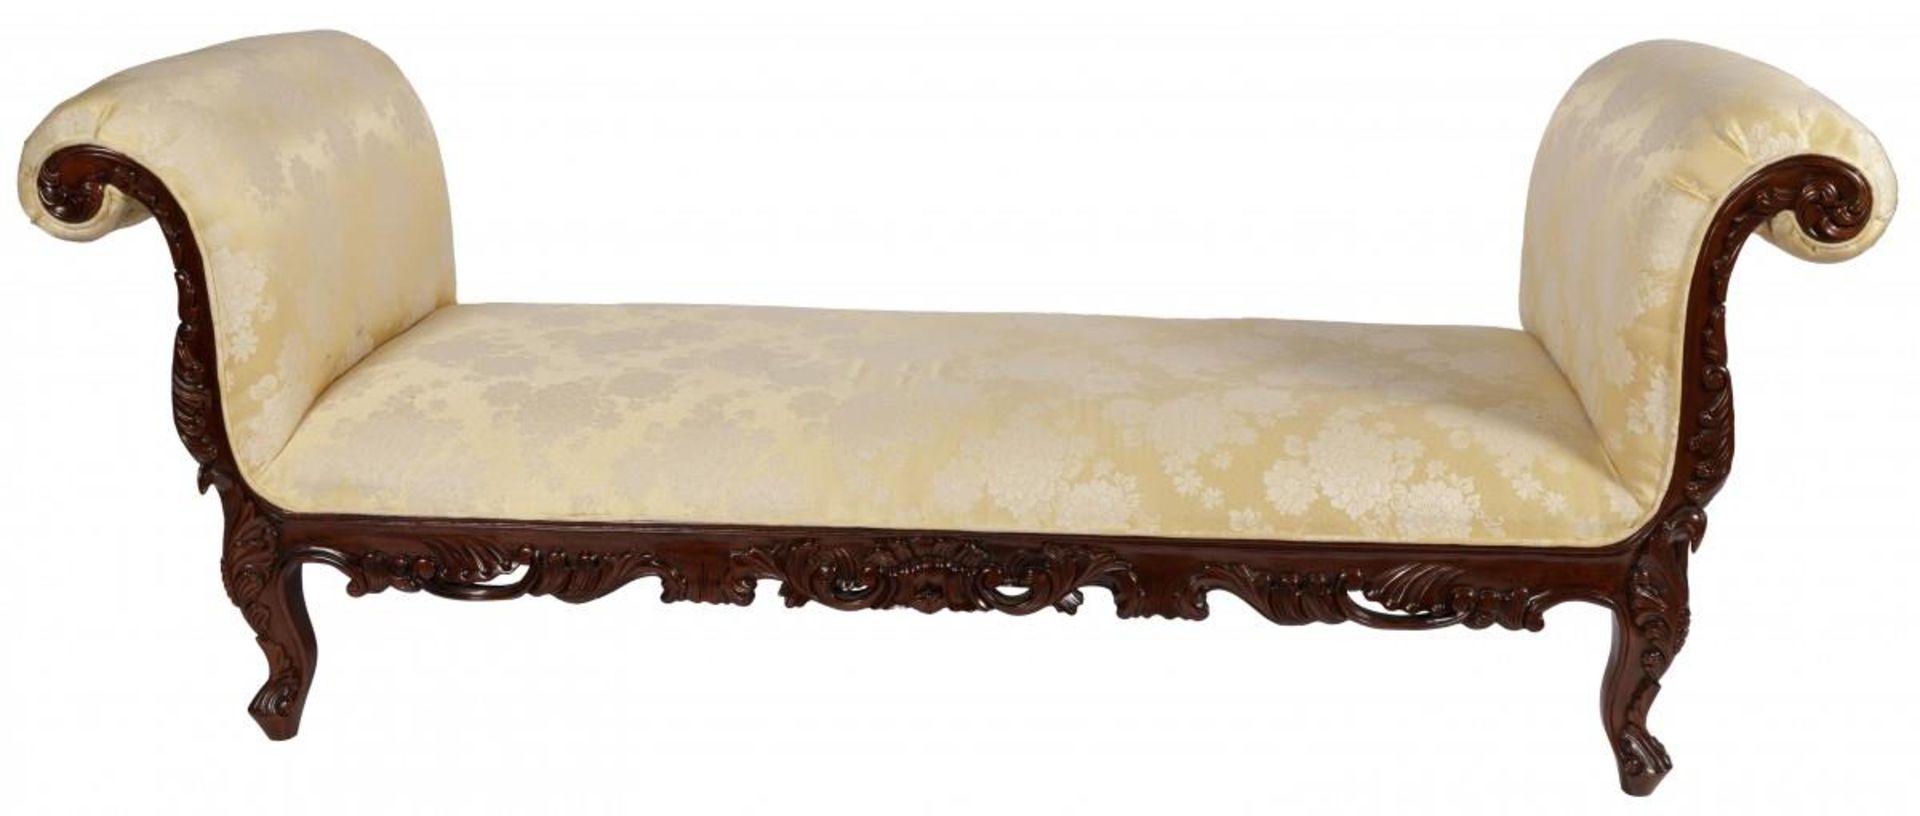 A carved mahogany wood récamier / daybed, 20th century.